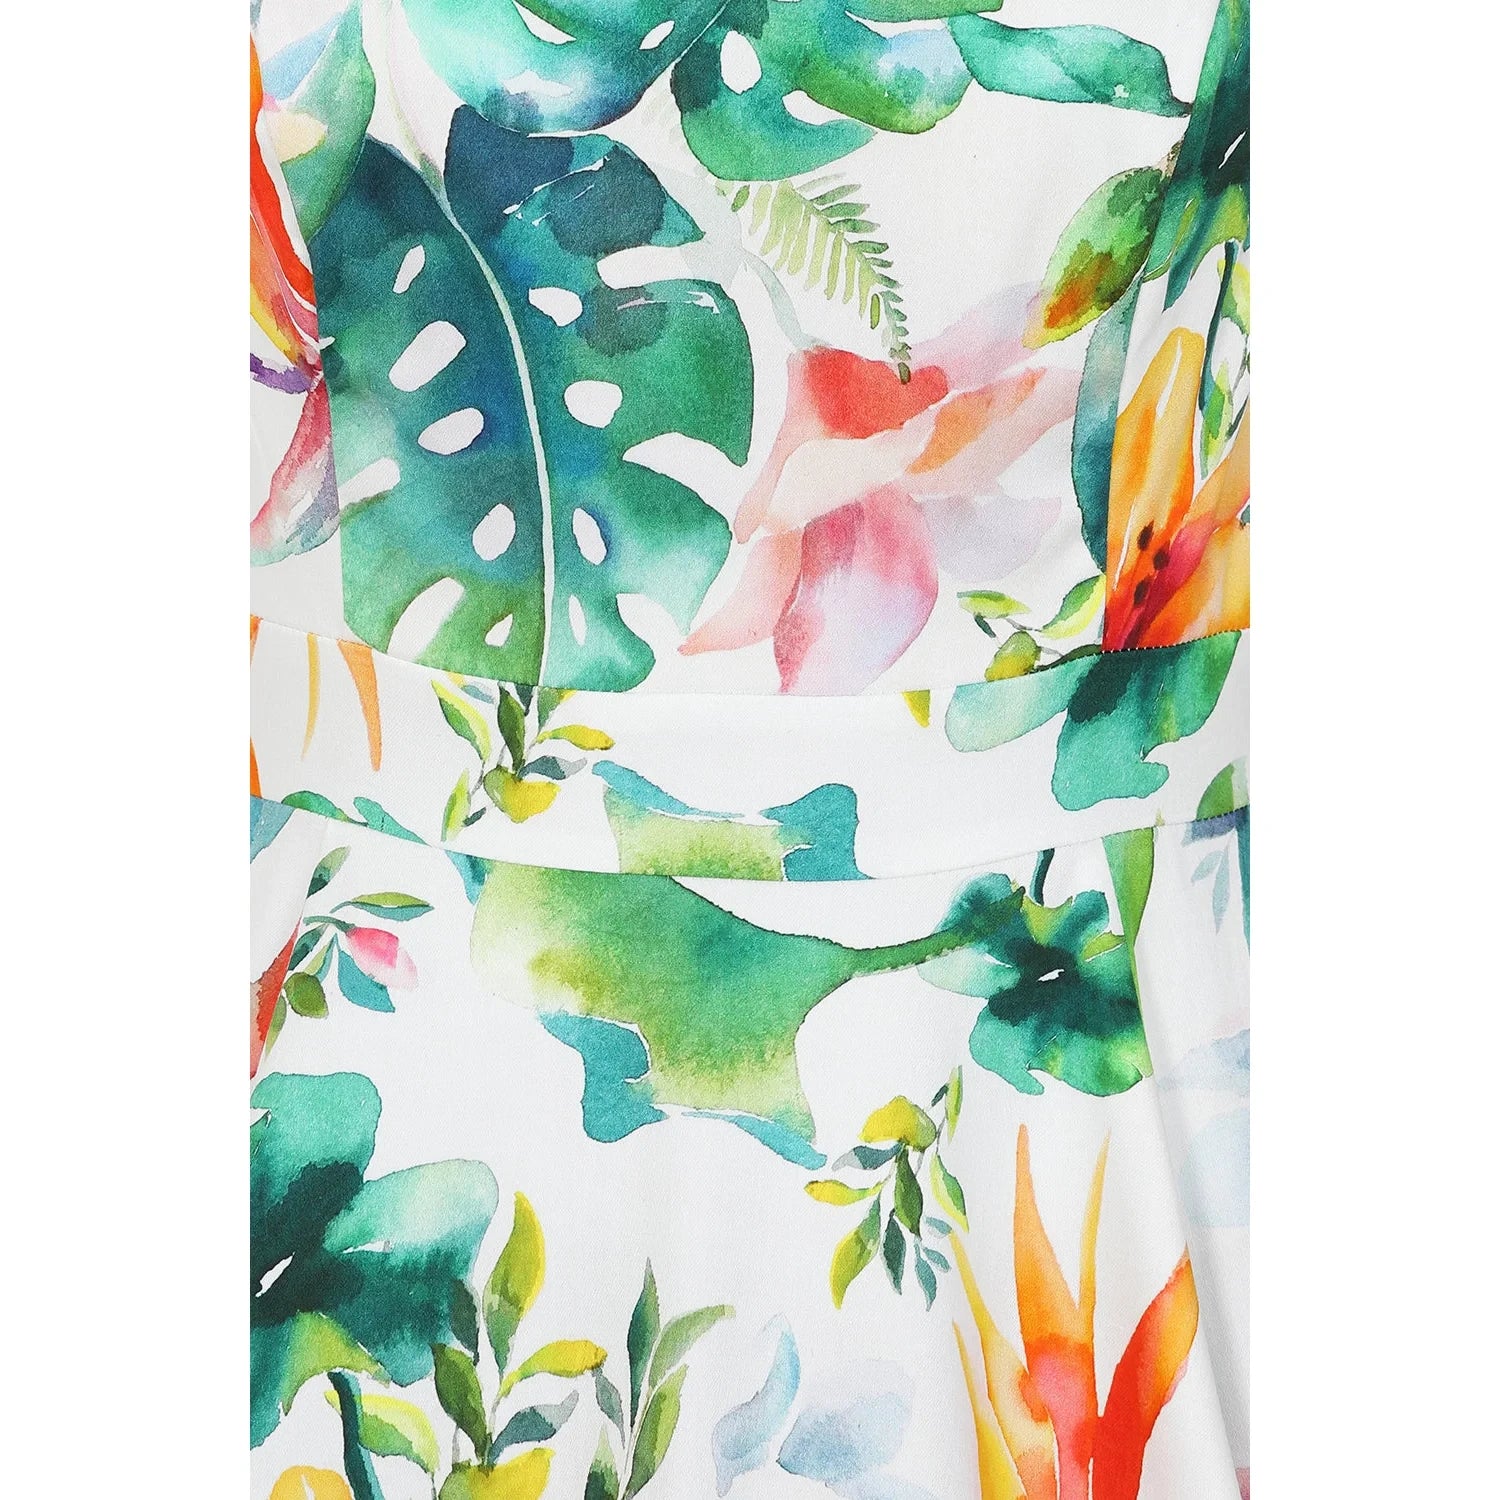 Tropical Print White Floral Summer Swing Party Dress